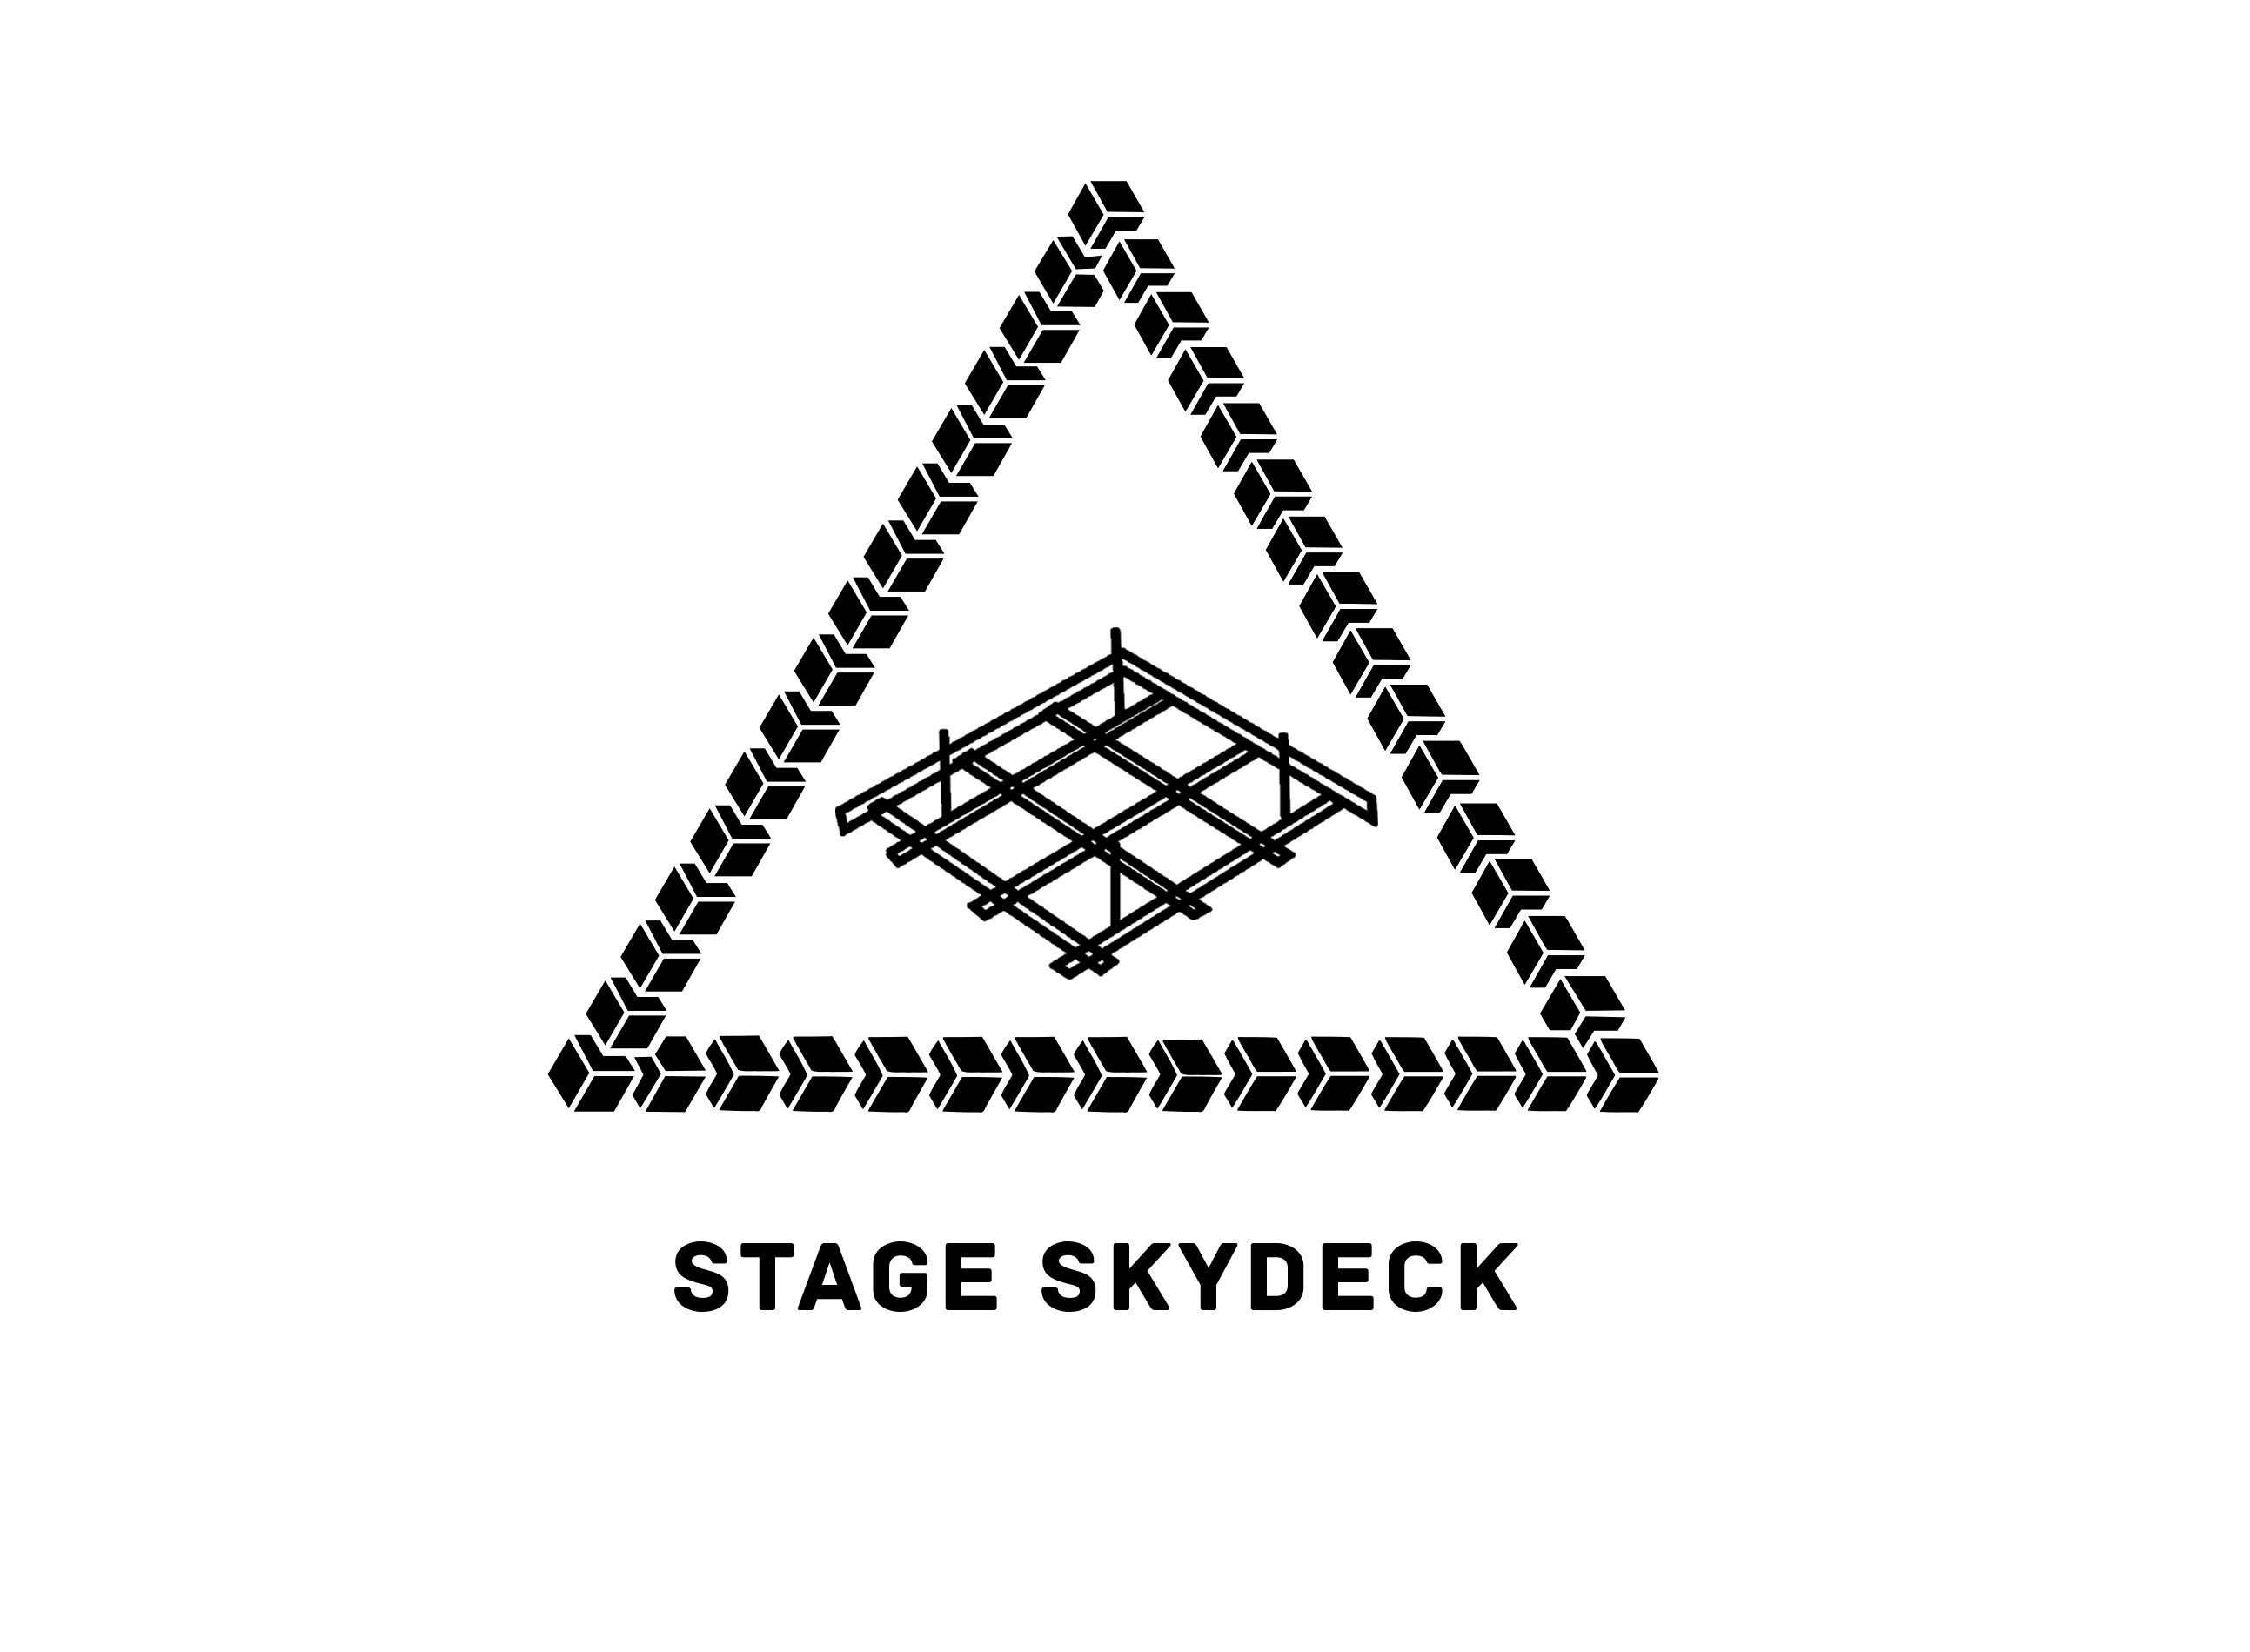 STAGE SKYDECK